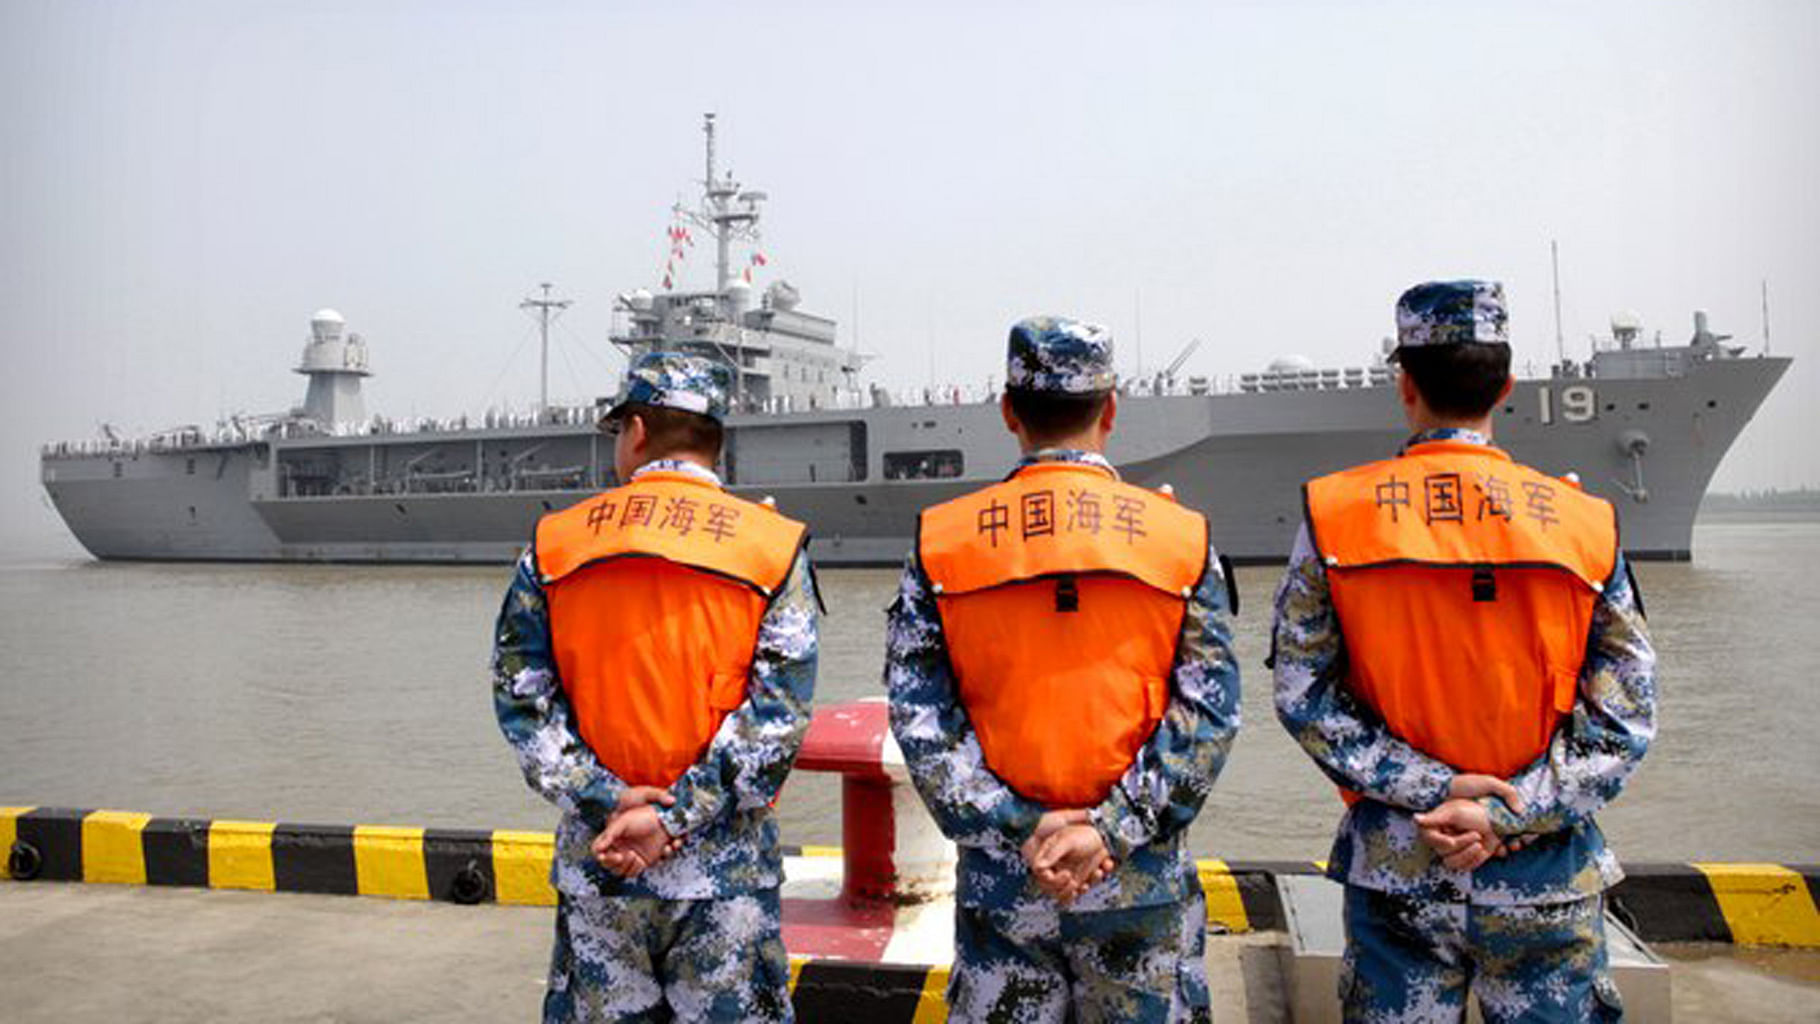 

File photo of soldiers from the Chinese People’s Liberation Army (PLA) Navy watching the USS Blue Ridge arrive at a port in Shanghai.